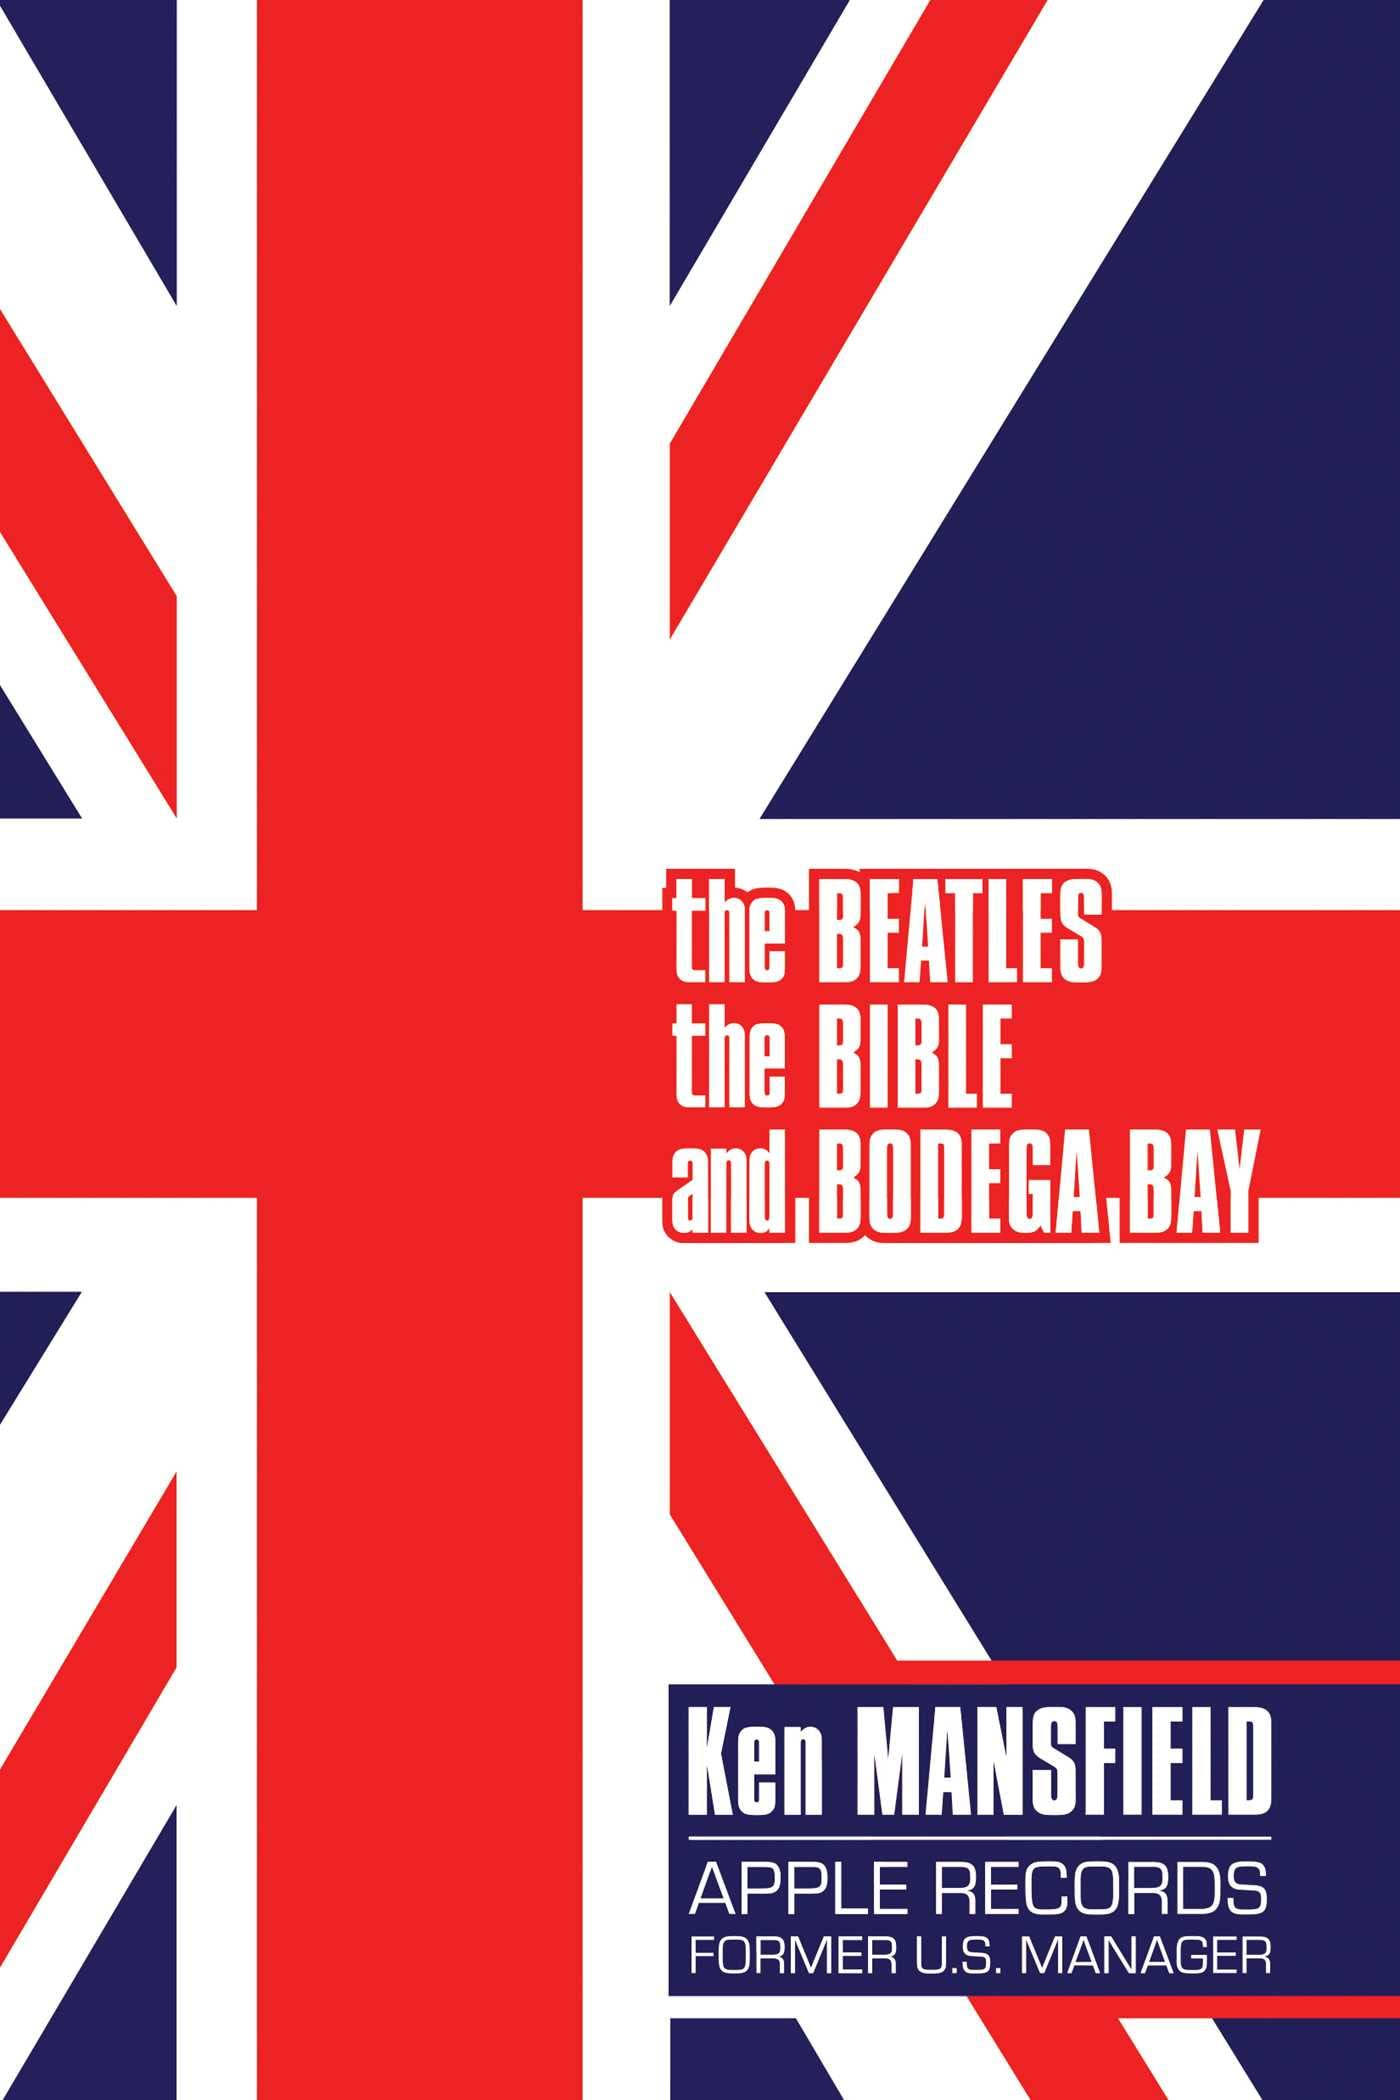 The Beatles The Bible and Bodega Bay by Ken Mansfield